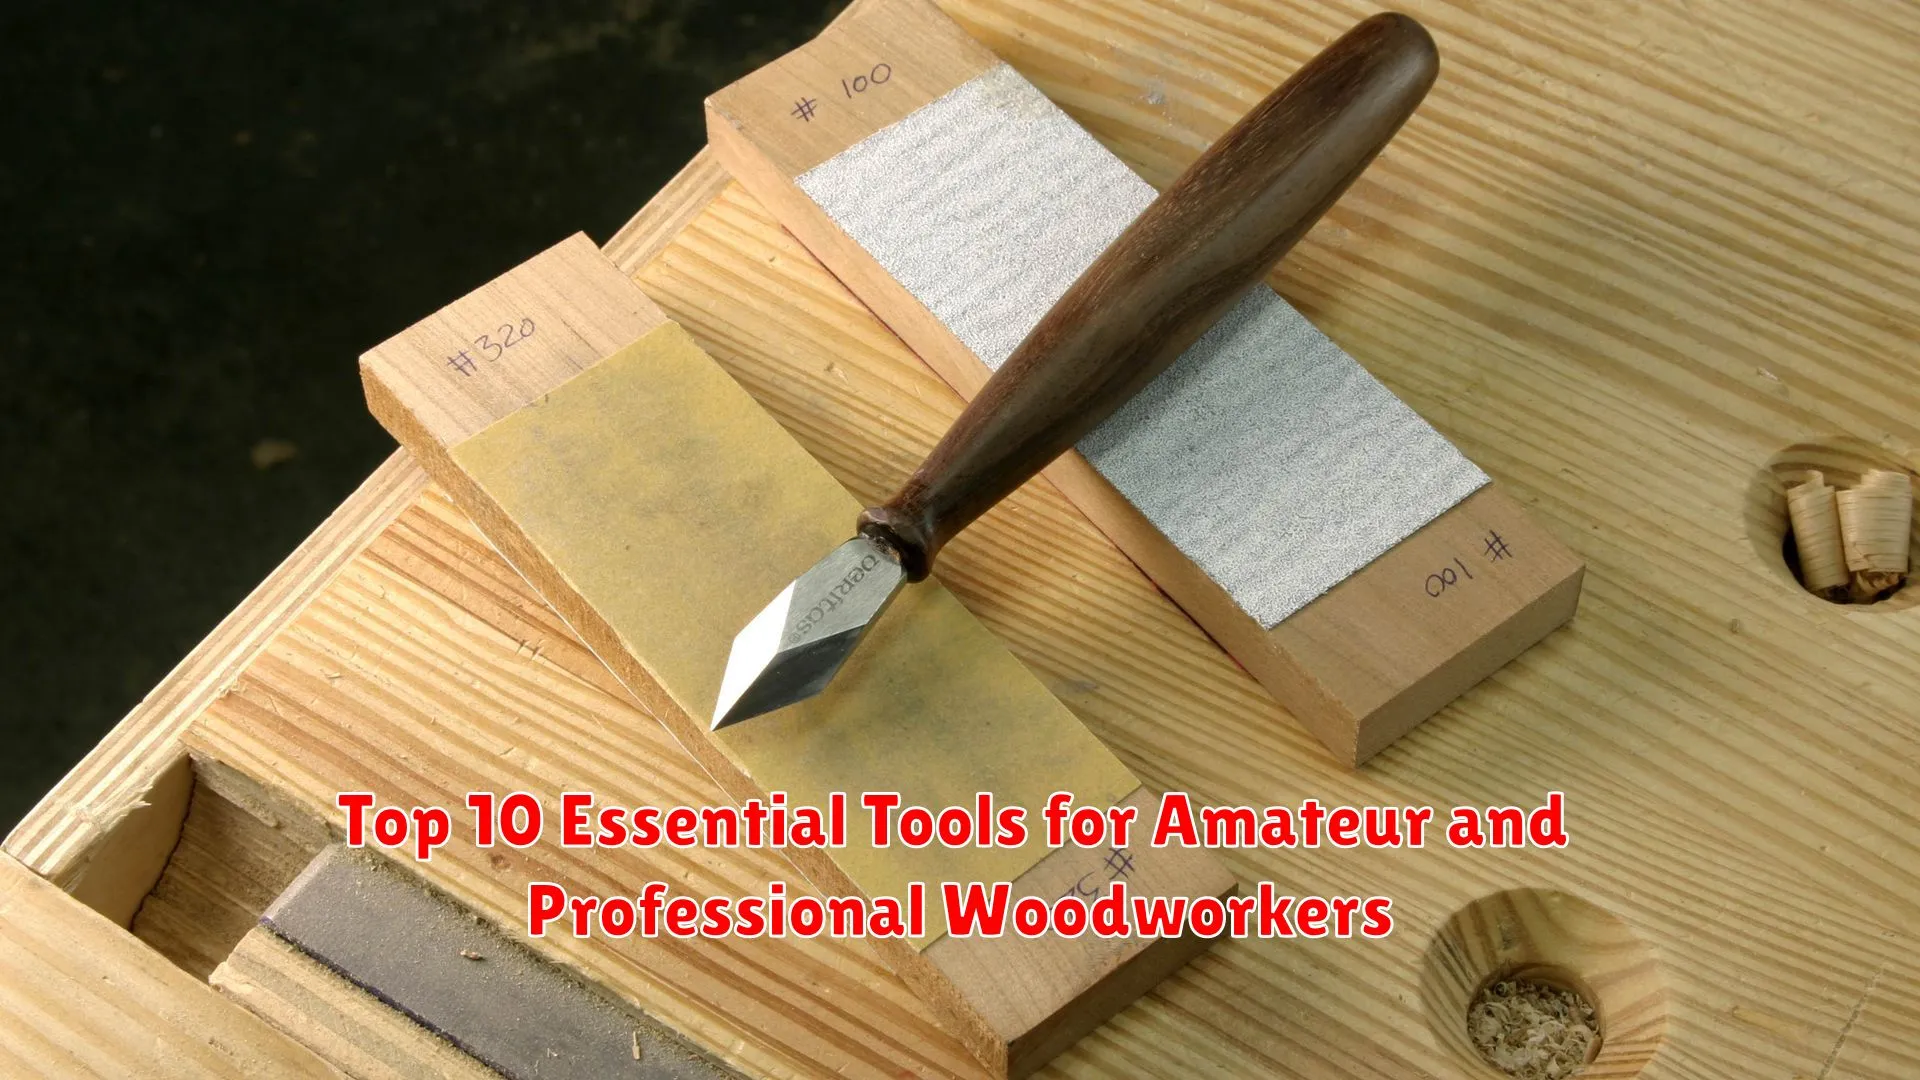 Top 10 Essential Tools for Amateur and Professional Woodworkers